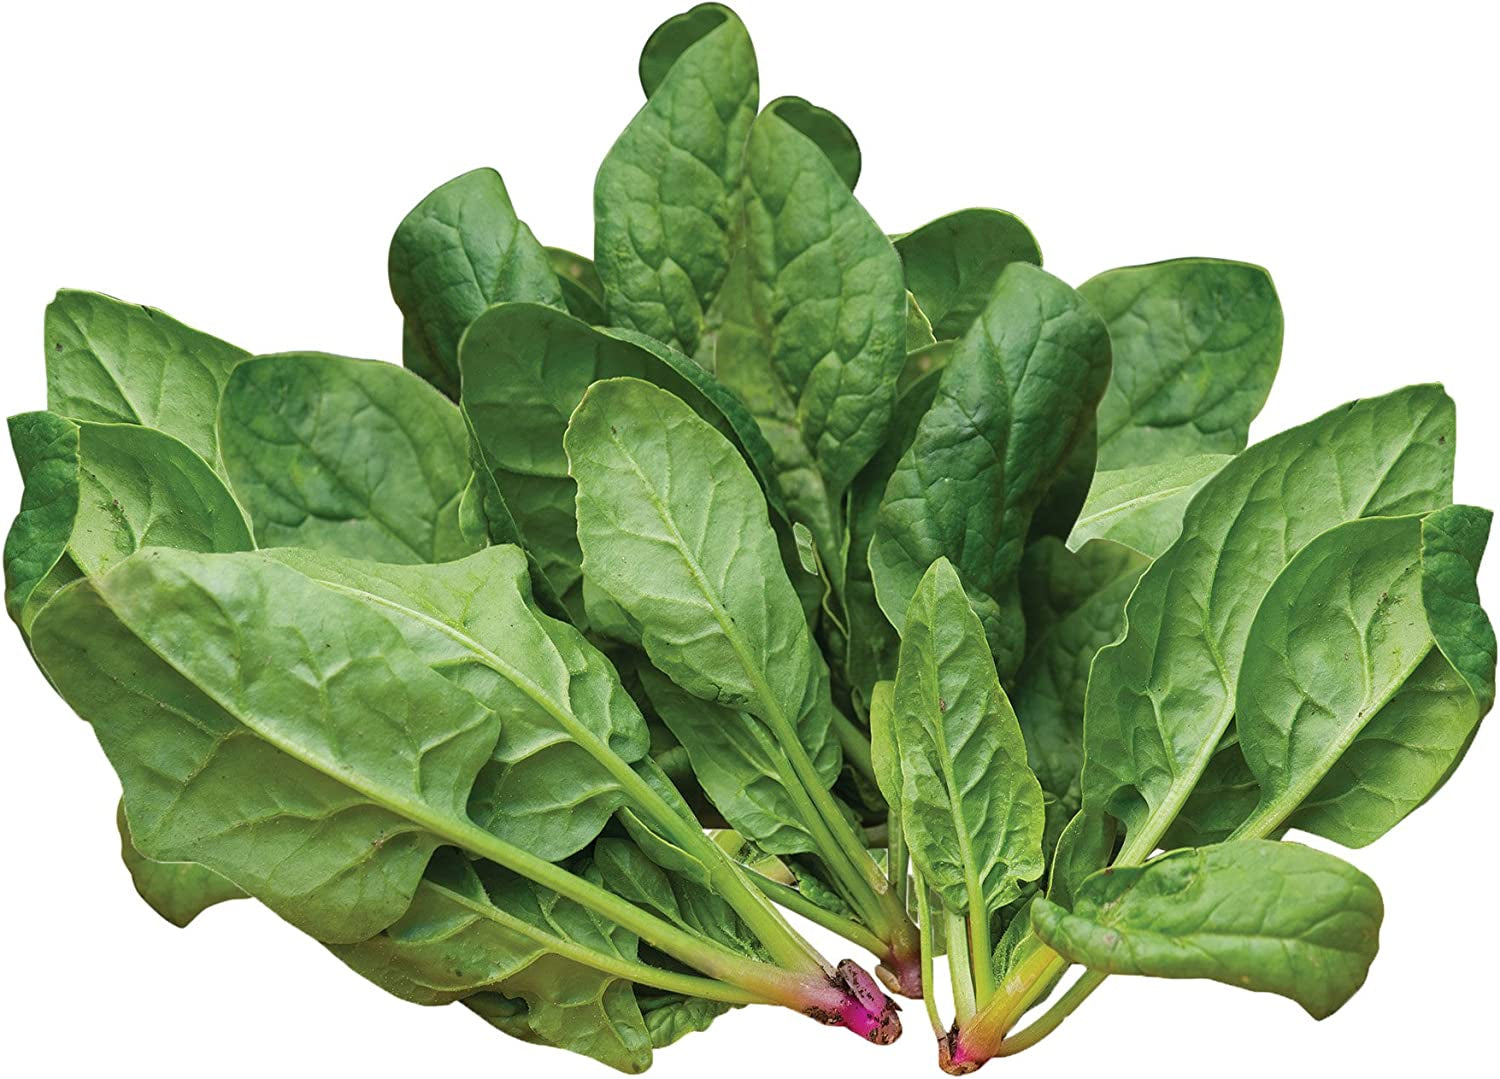 Space Hybrid Spinach Seeds 300 Seeds